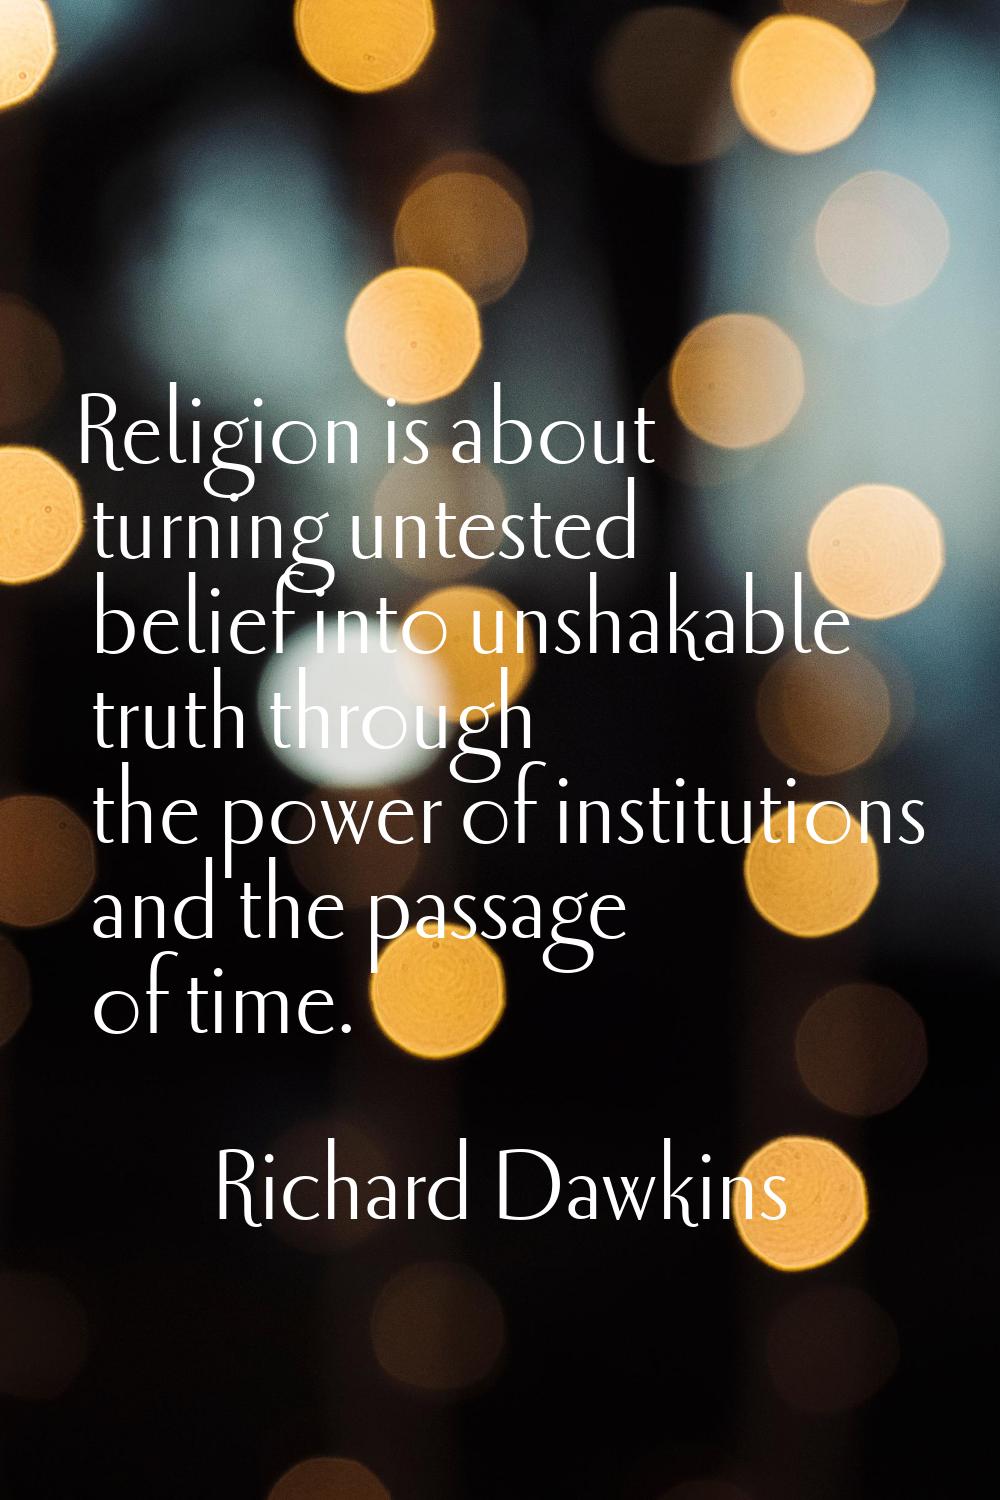 Religion is about turning untested belief into unshakable truth through the power of institutions a